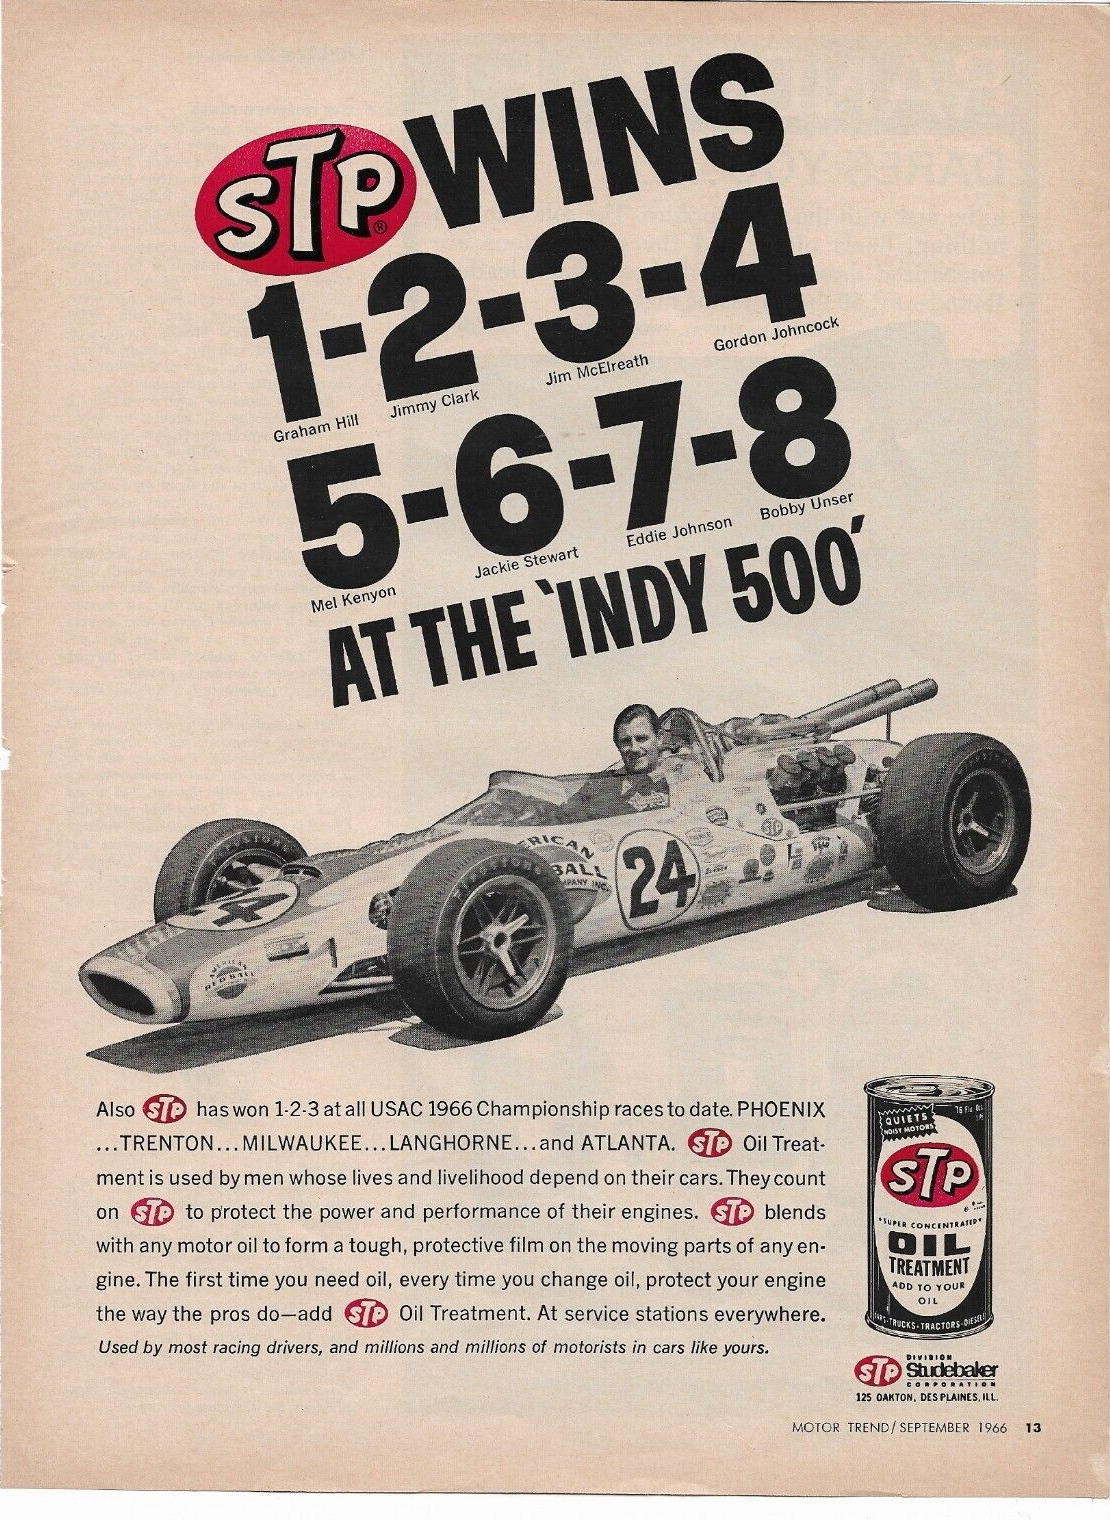 STP Wins Vtg 1966 Print Ad Indy 500 STP Oil Treatment Helps Protect Engine